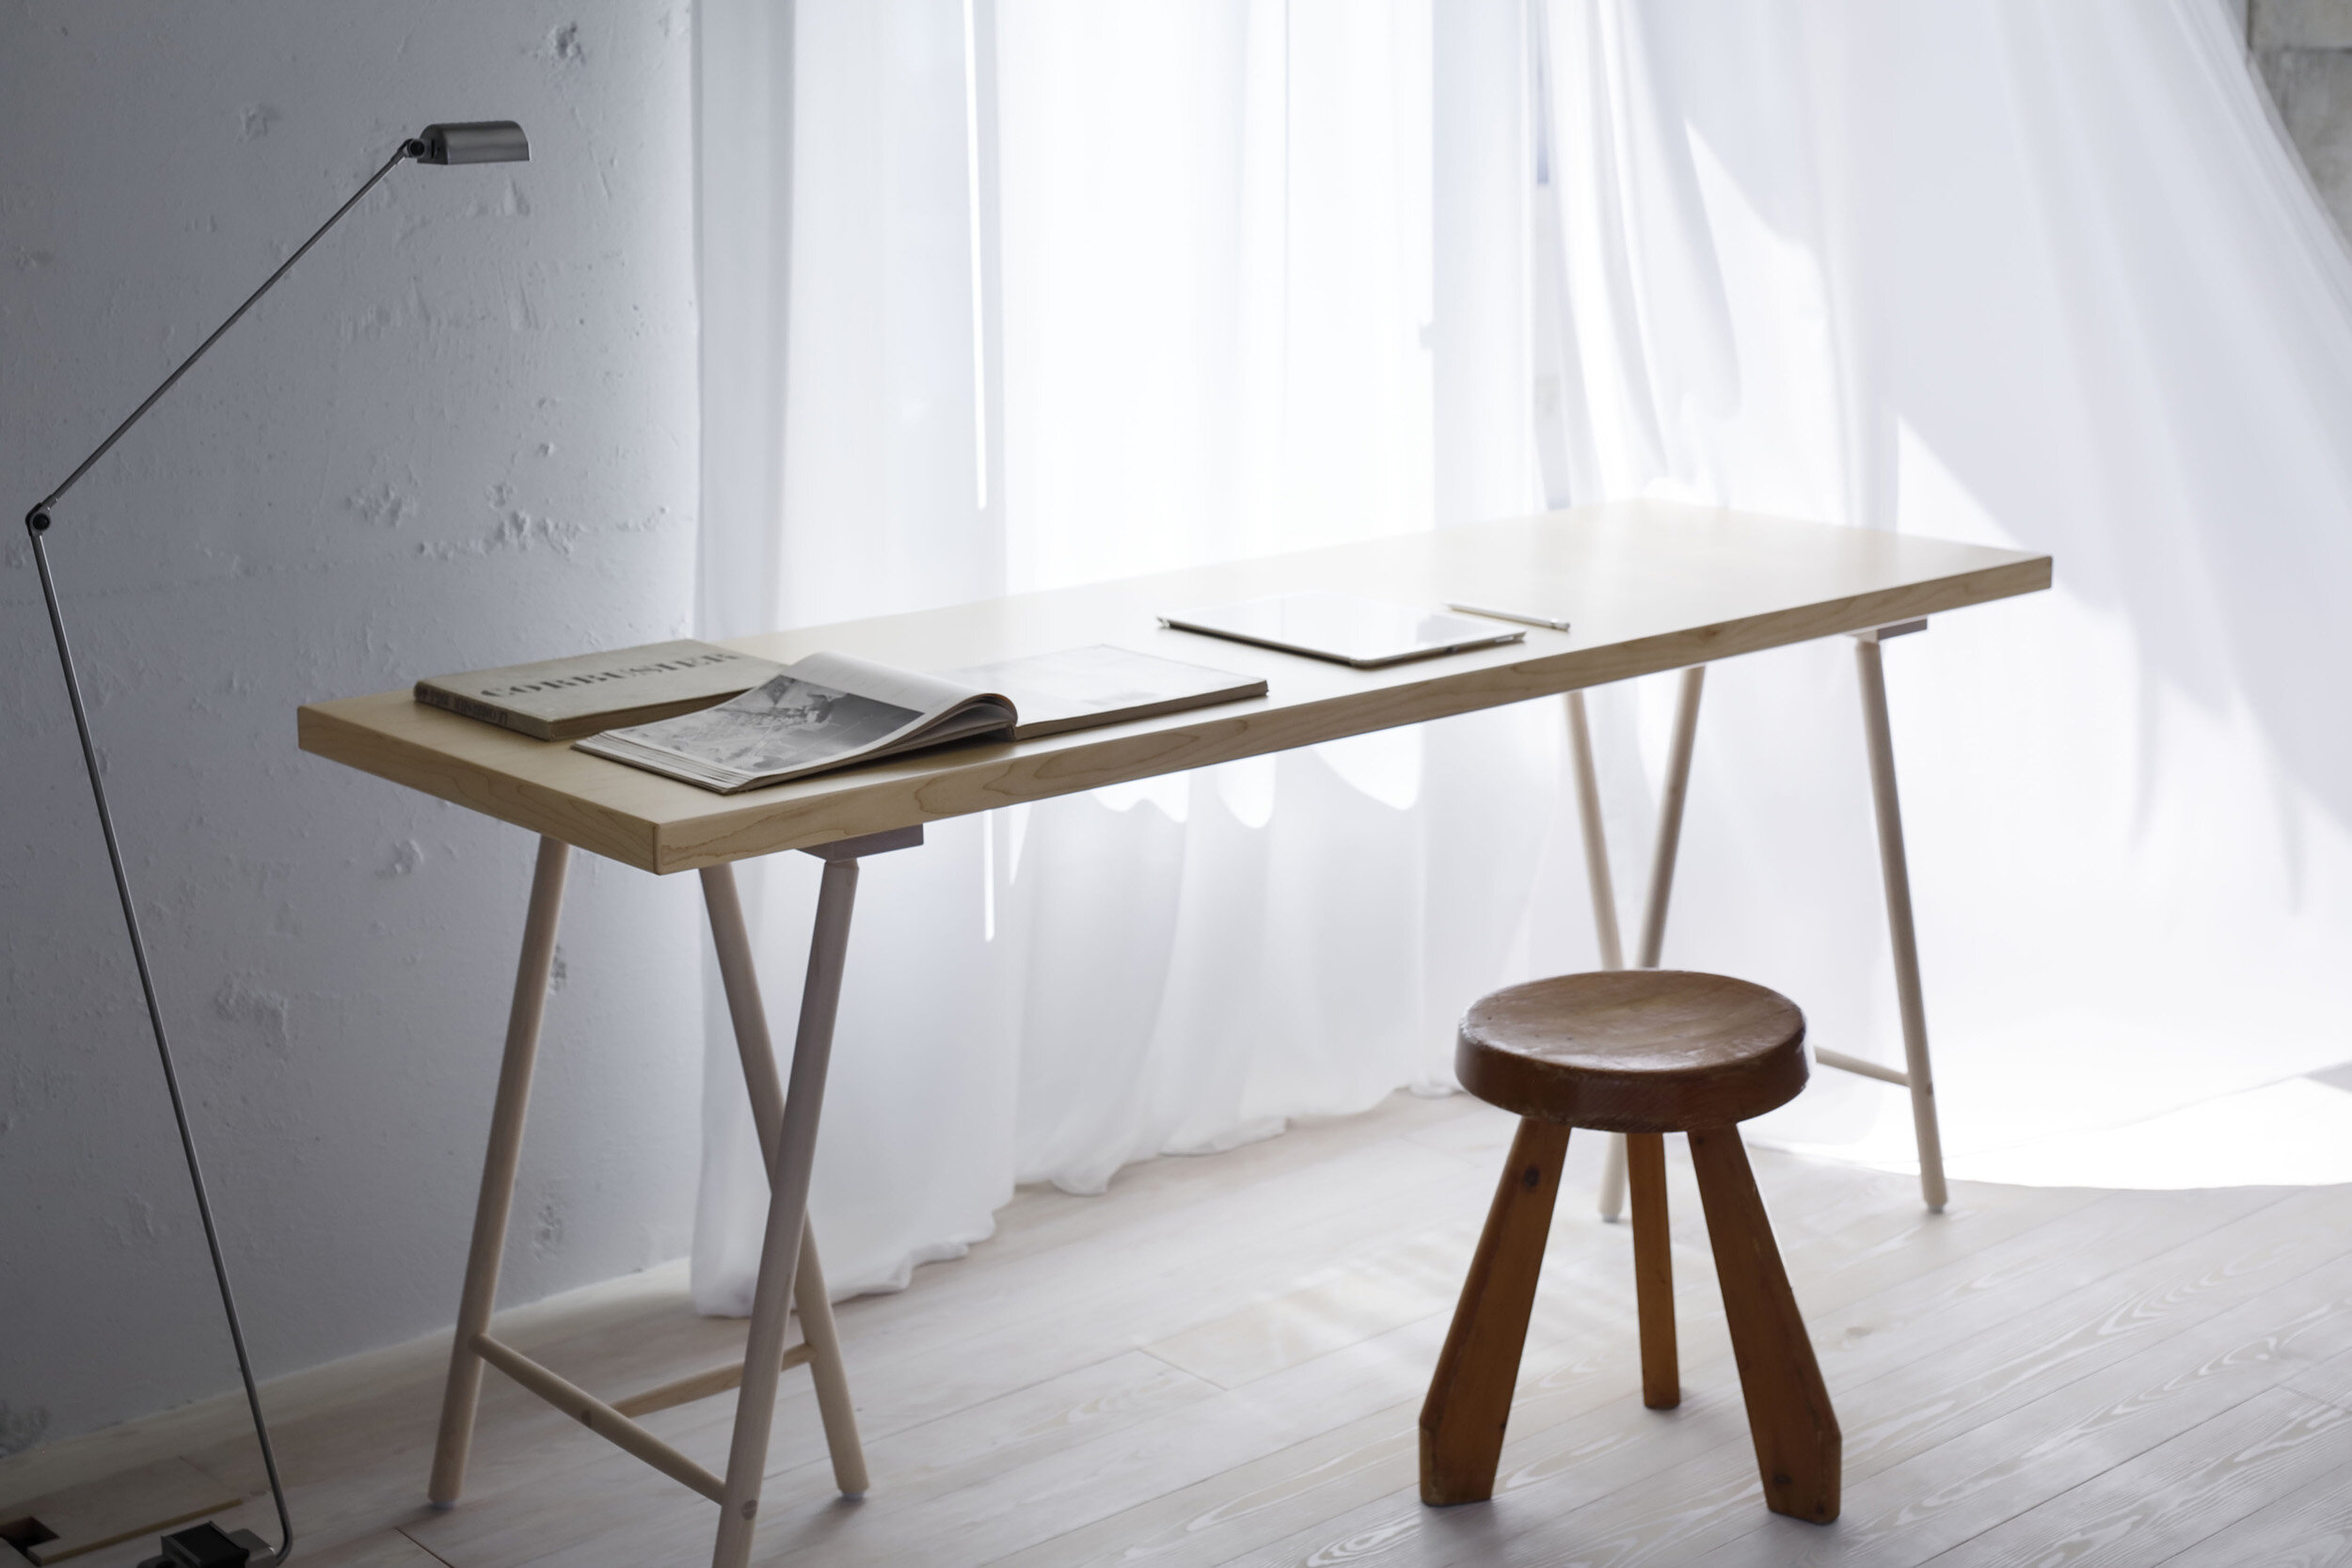  The custom-made wooden table was designed by Hiroyuki Ogura/DRAWERS. 